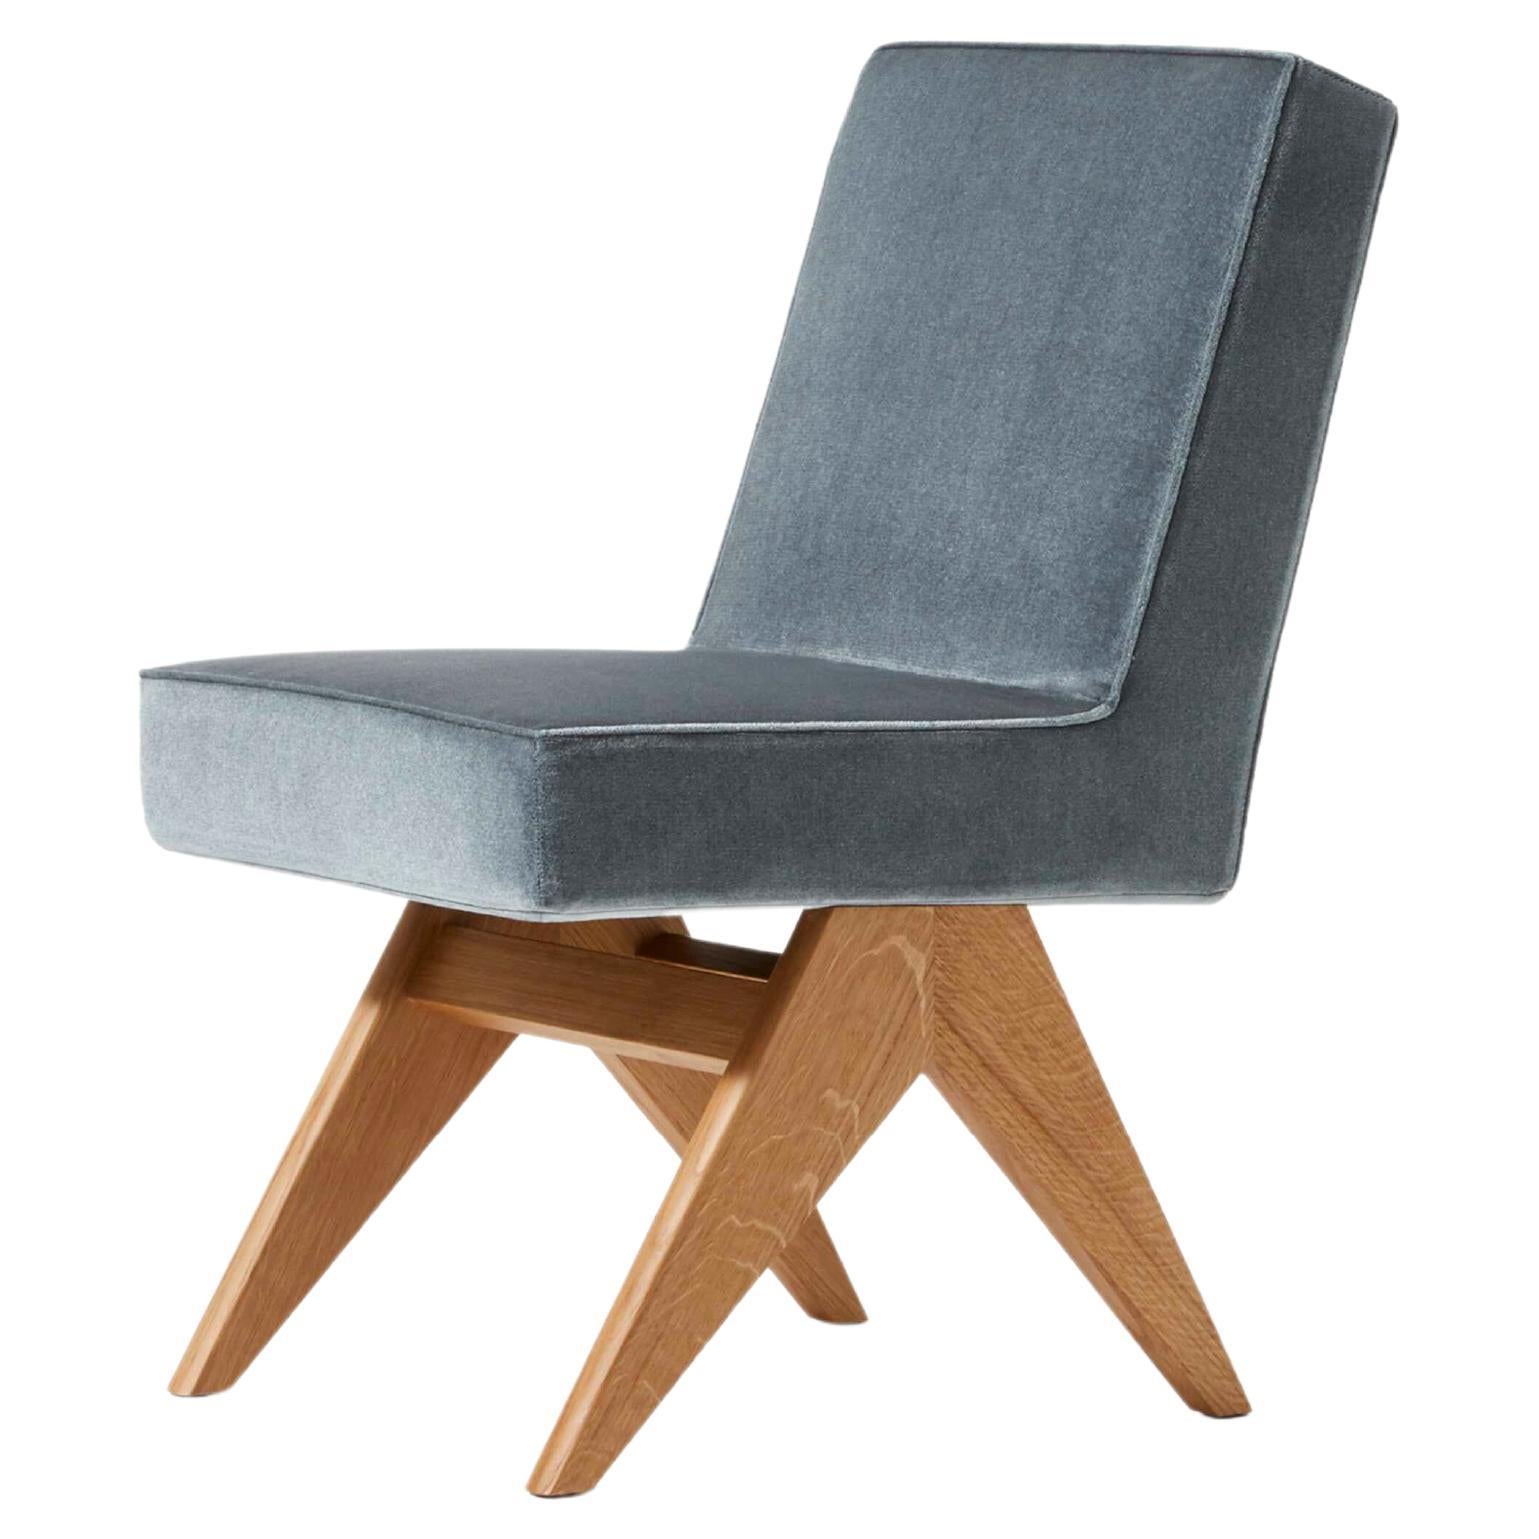 Pierre Jeanneret Committee Dining Chair for Cassina, Italy - New  For Sale